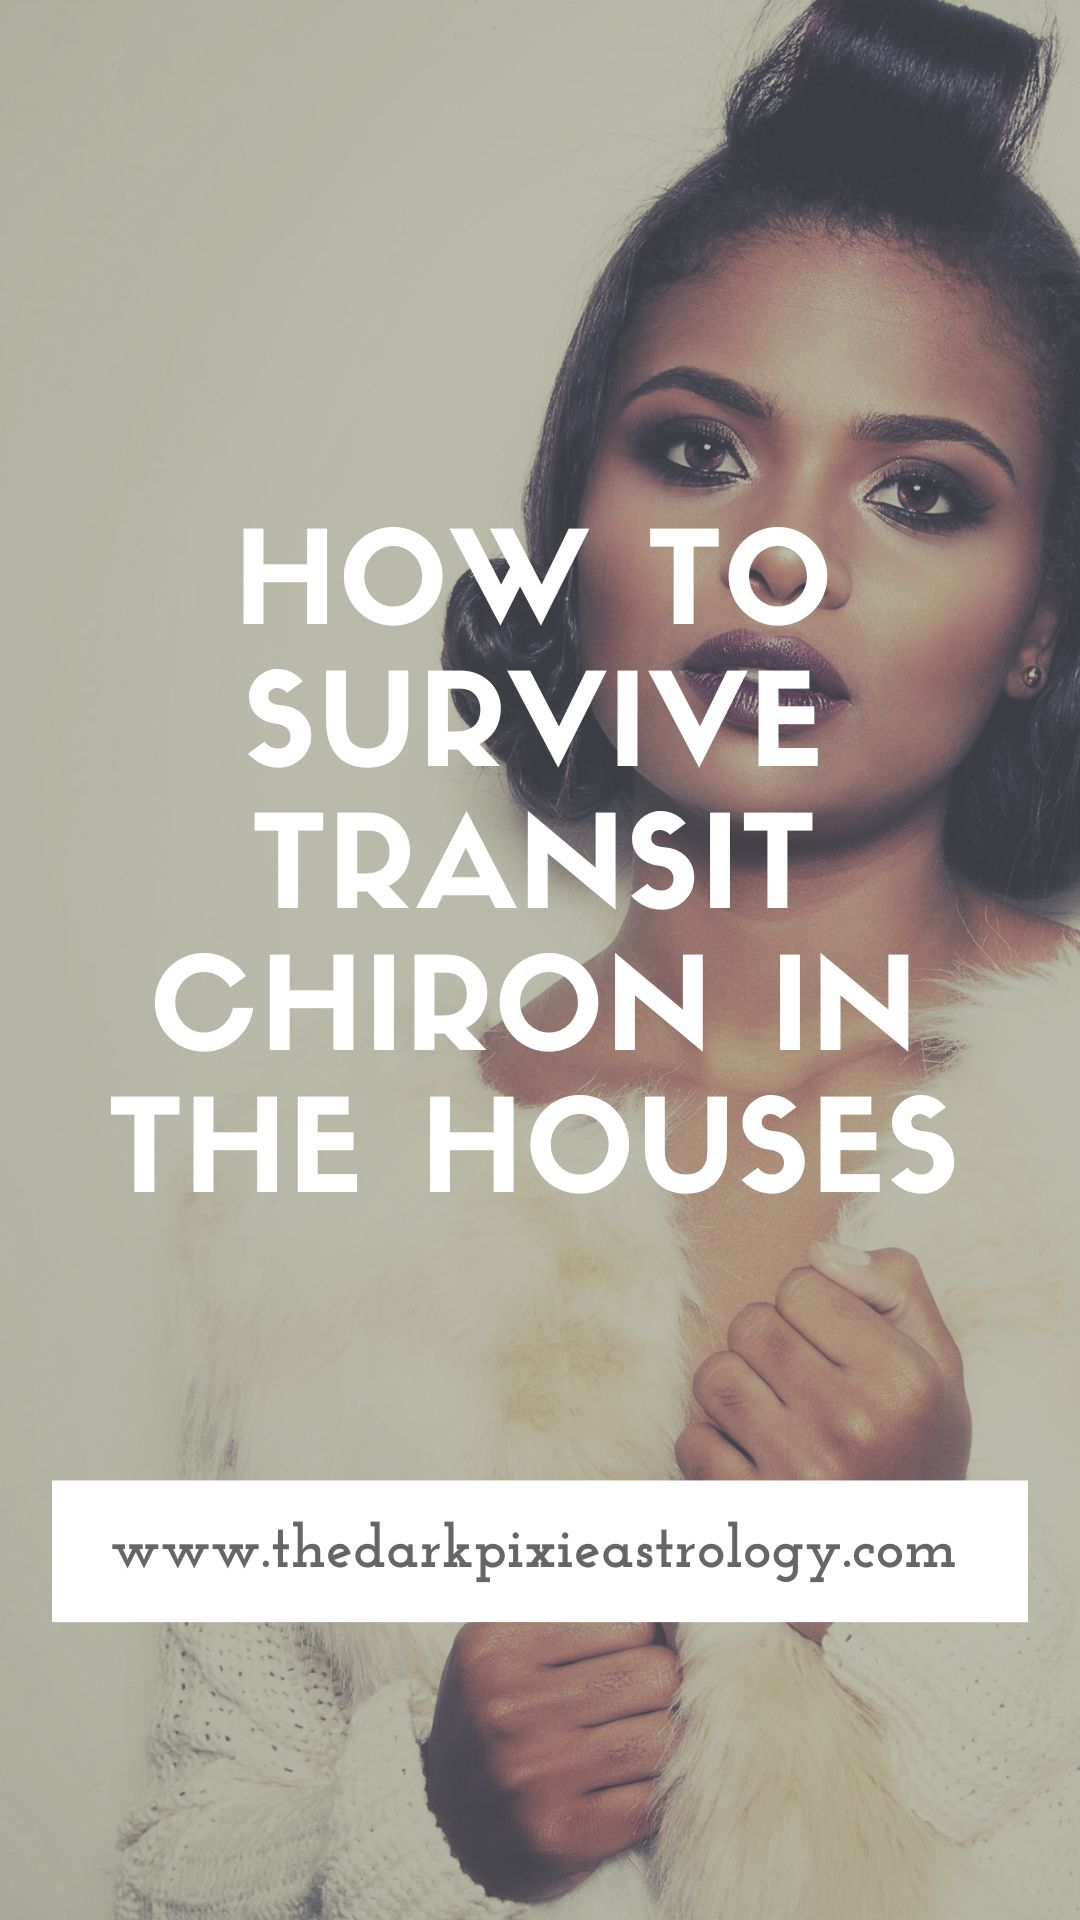 How to Survive Transit Chiron in the Houses - The Dark Pixie Astrology